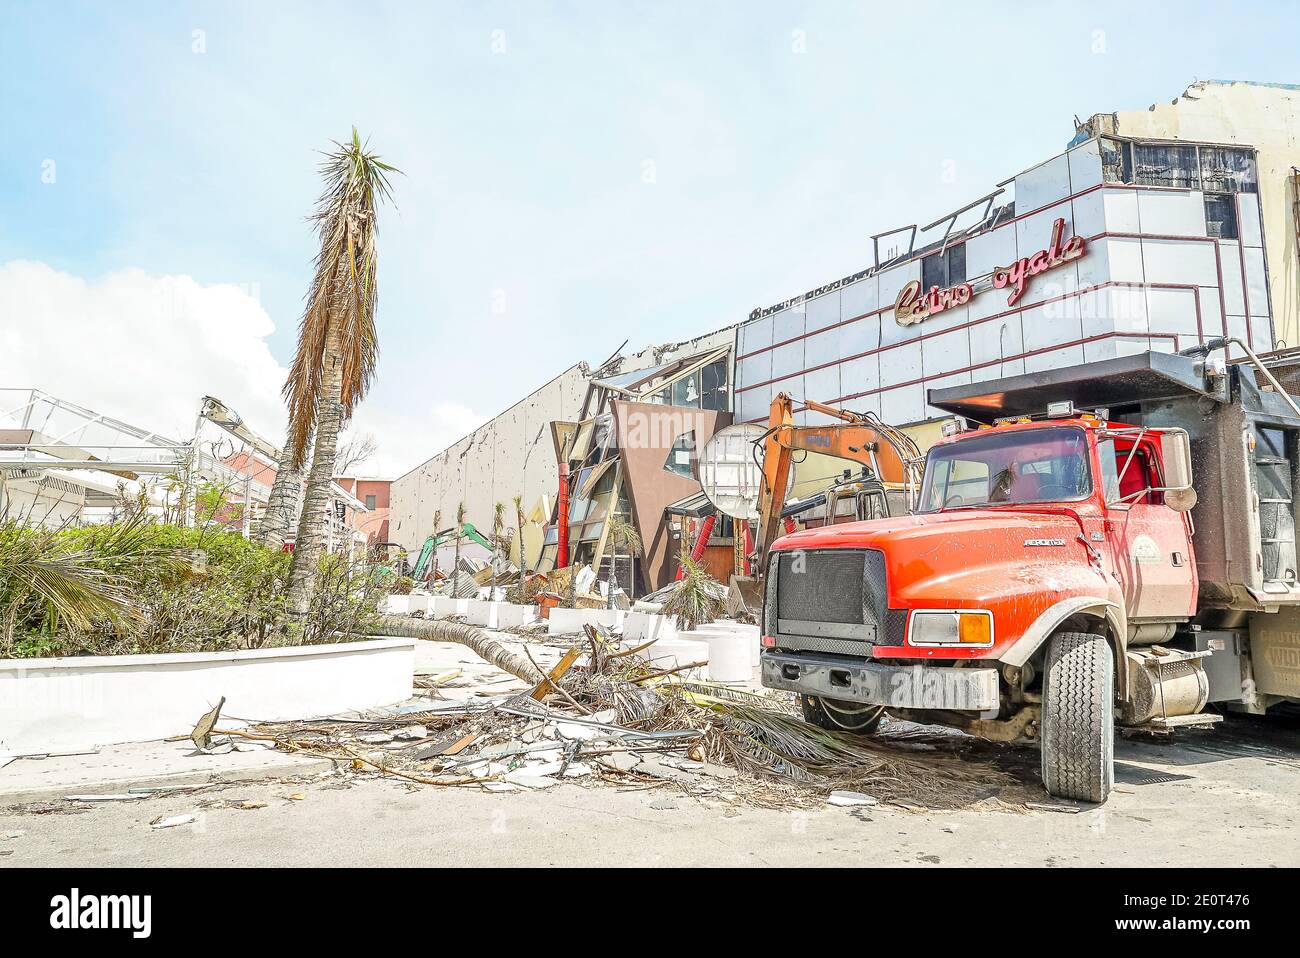 Car vehicle damage cause by a hurricane that hit the caribbean island of st.maarten. Damage vehicles. Stock Photo